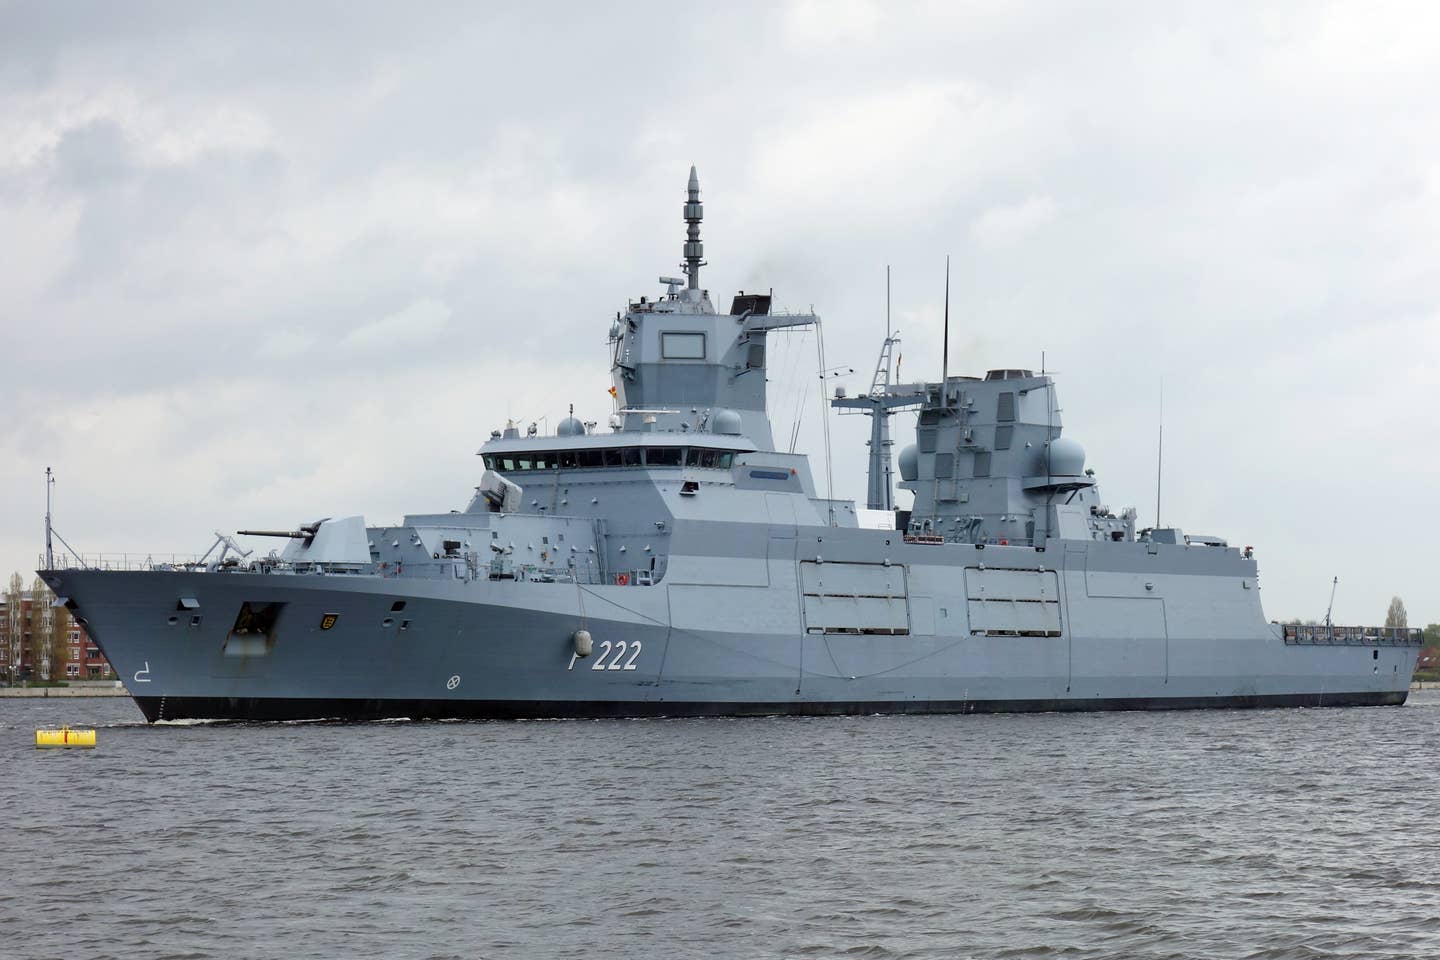 The Baden-Wu00fcrttemberg, lead ship of the F125 class.